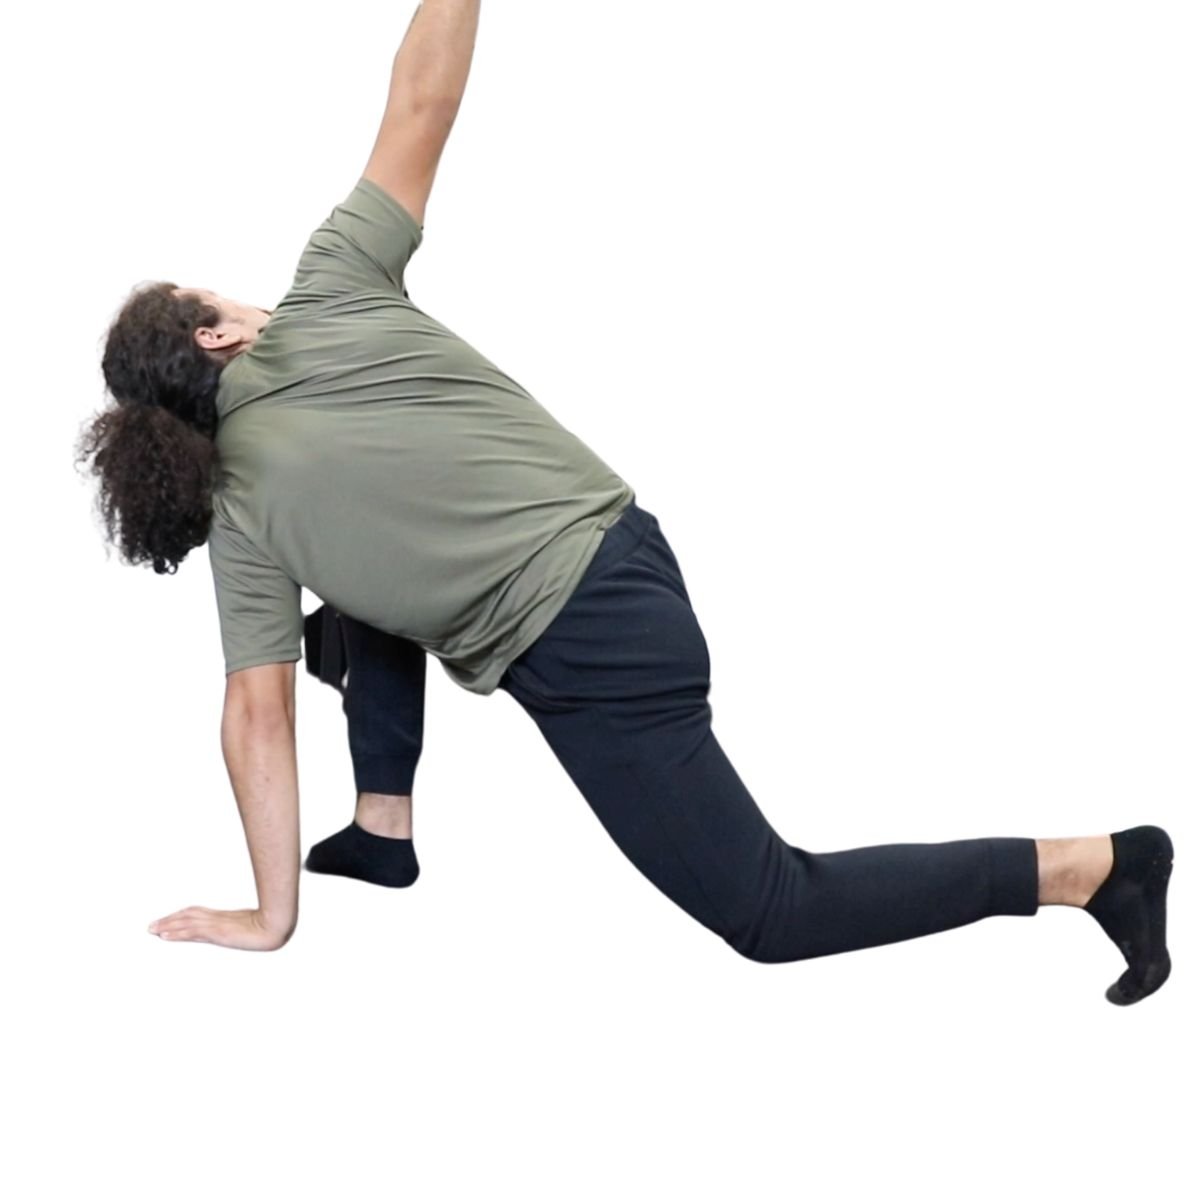 Learn About the World's Greatest Stretch: The Most Complete Full